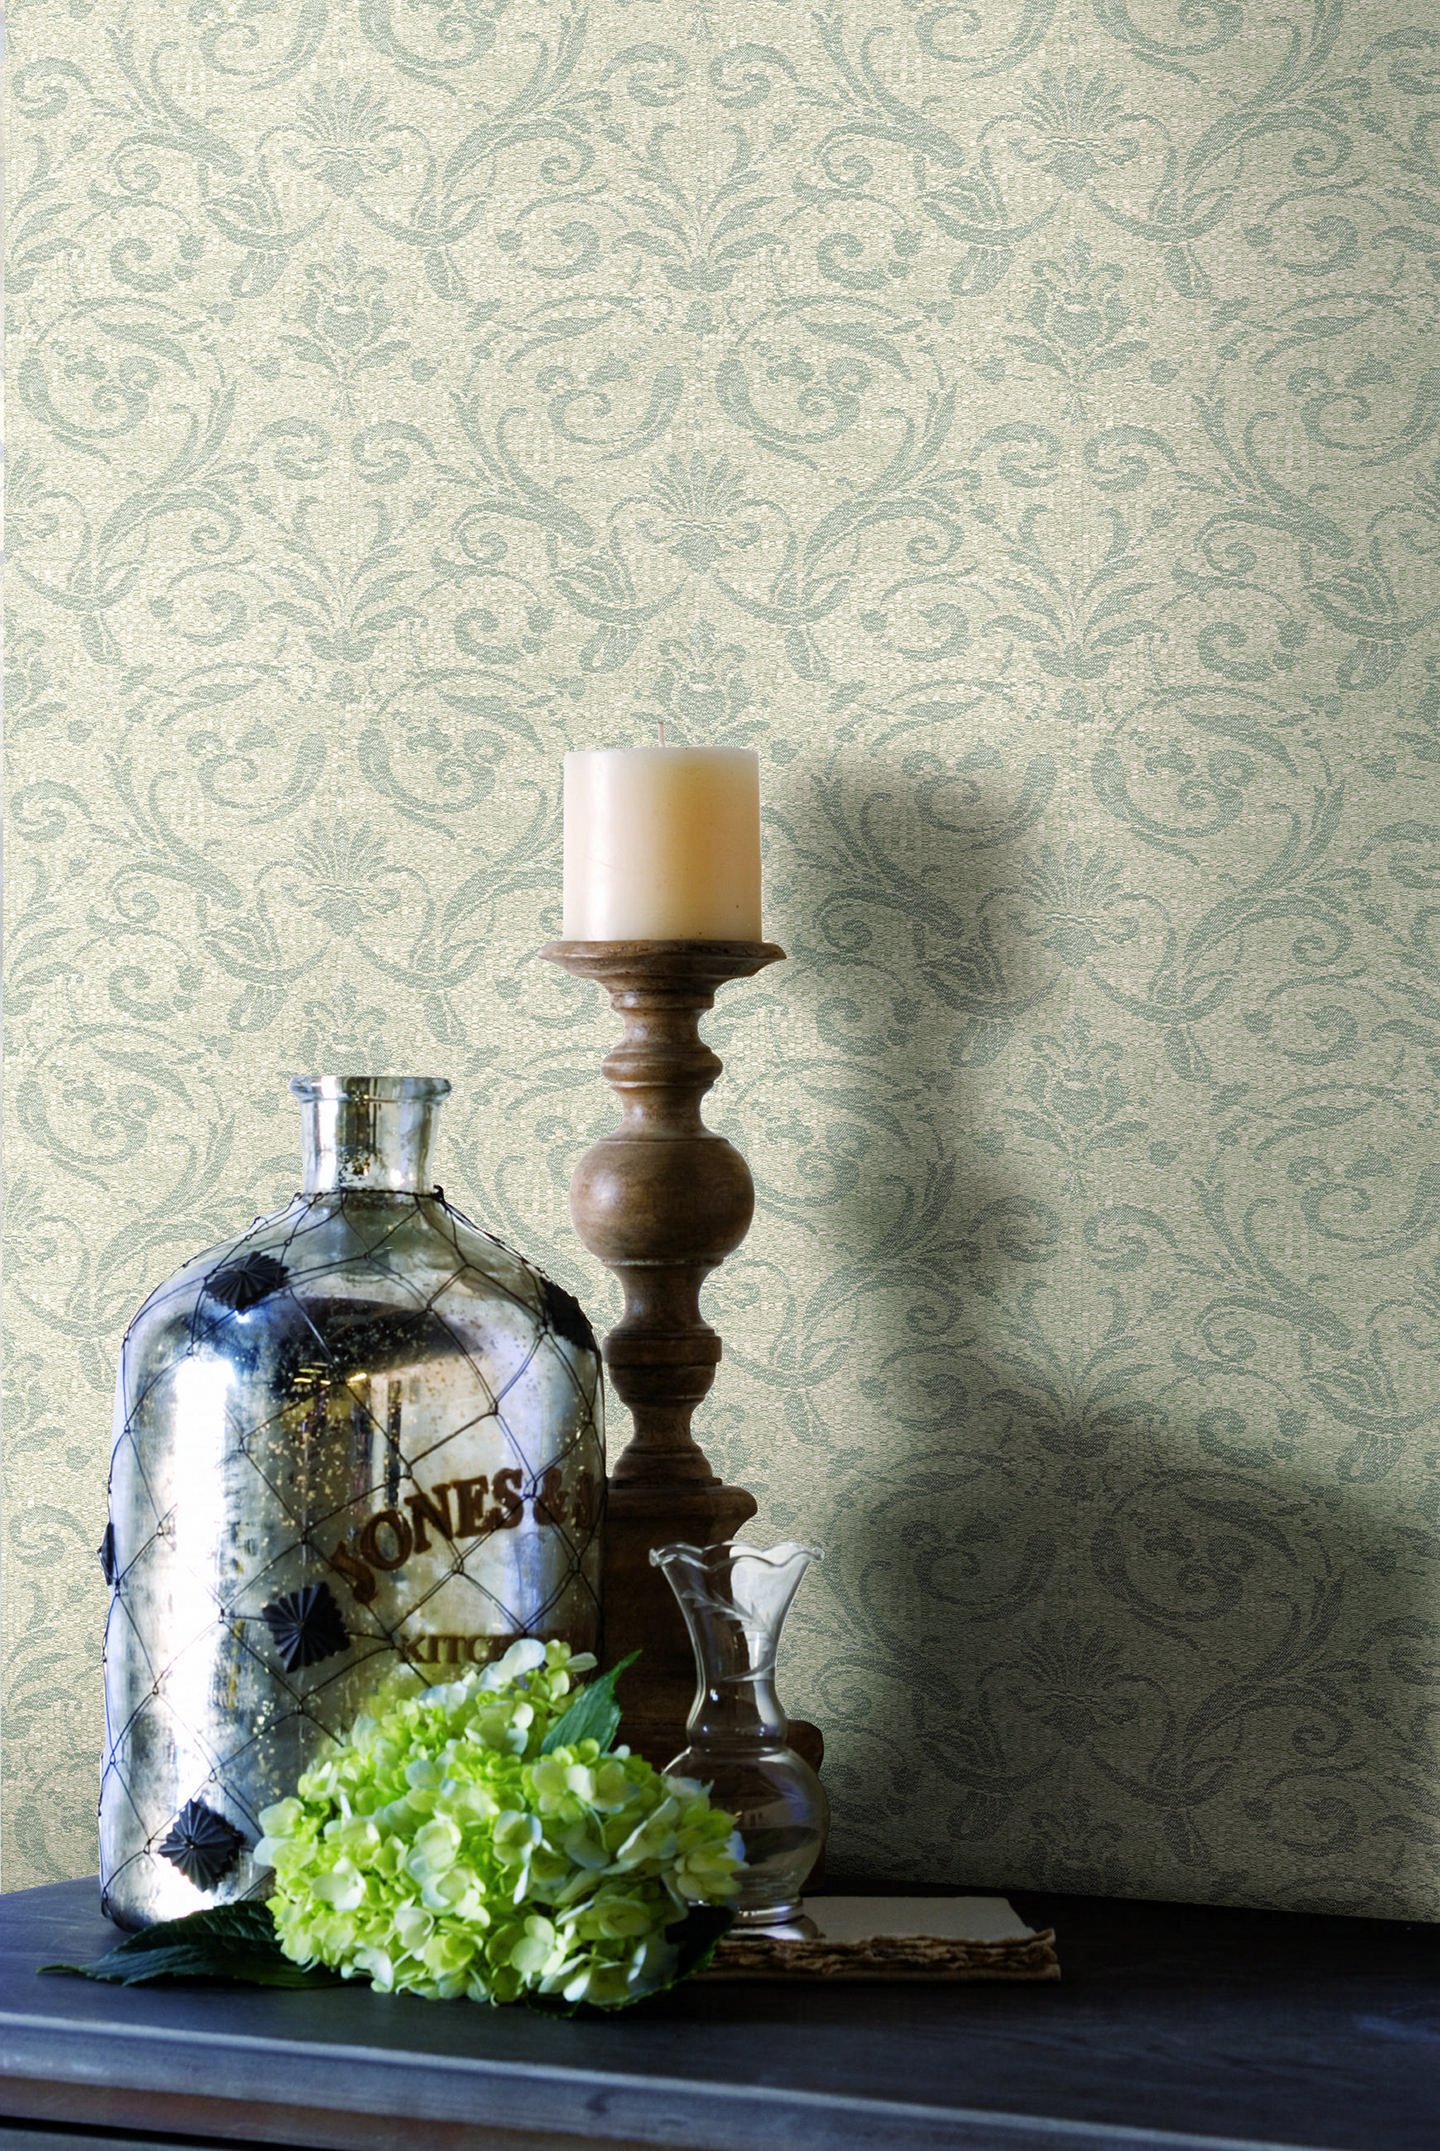 Wallquest Features Vintage Style Wallpaper In The British Tradition